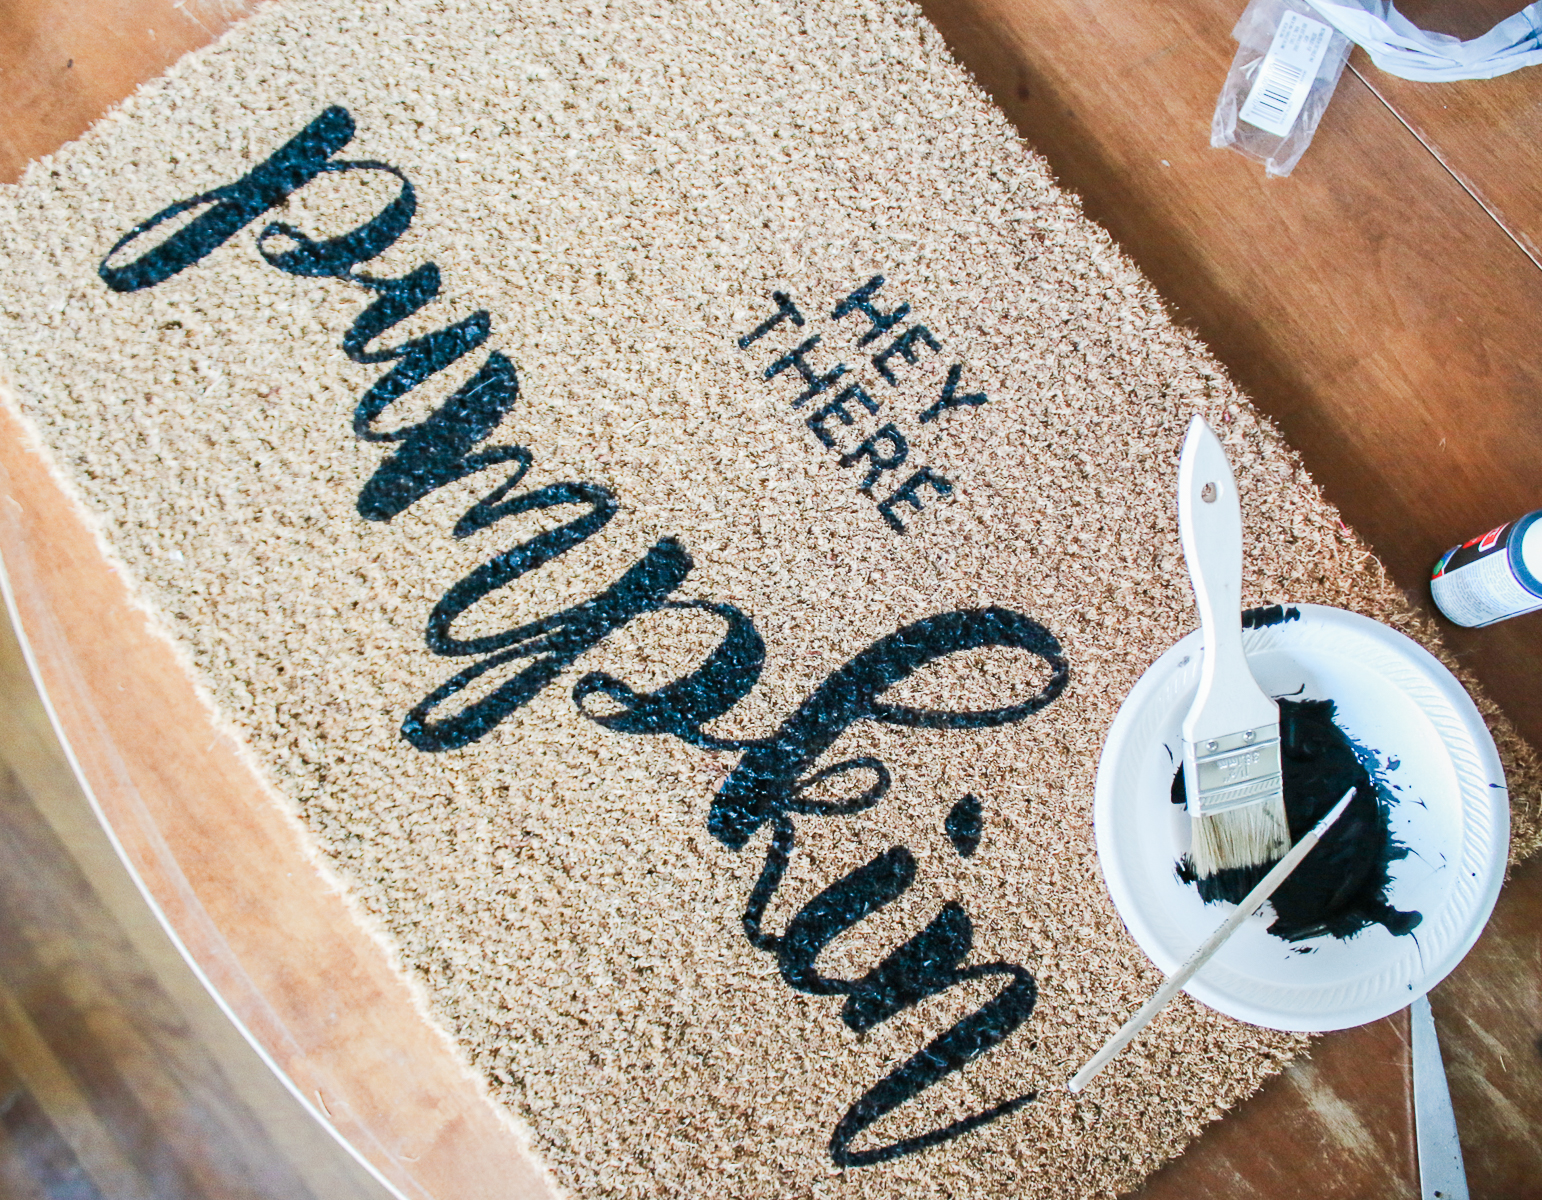 How to design your own doormat, DIY Hey There Pumpkin Doormat: How to Make Stencils with a Cricut Explore Air by southern lifestyle blogger Stephanie Ziajka from Diary of a Debutante, DIY Hey There Pumpkin Doormat, DIY Cricut doormat, how do I make a stencil with my Cricut, making stencils with the Cricut Explore Air